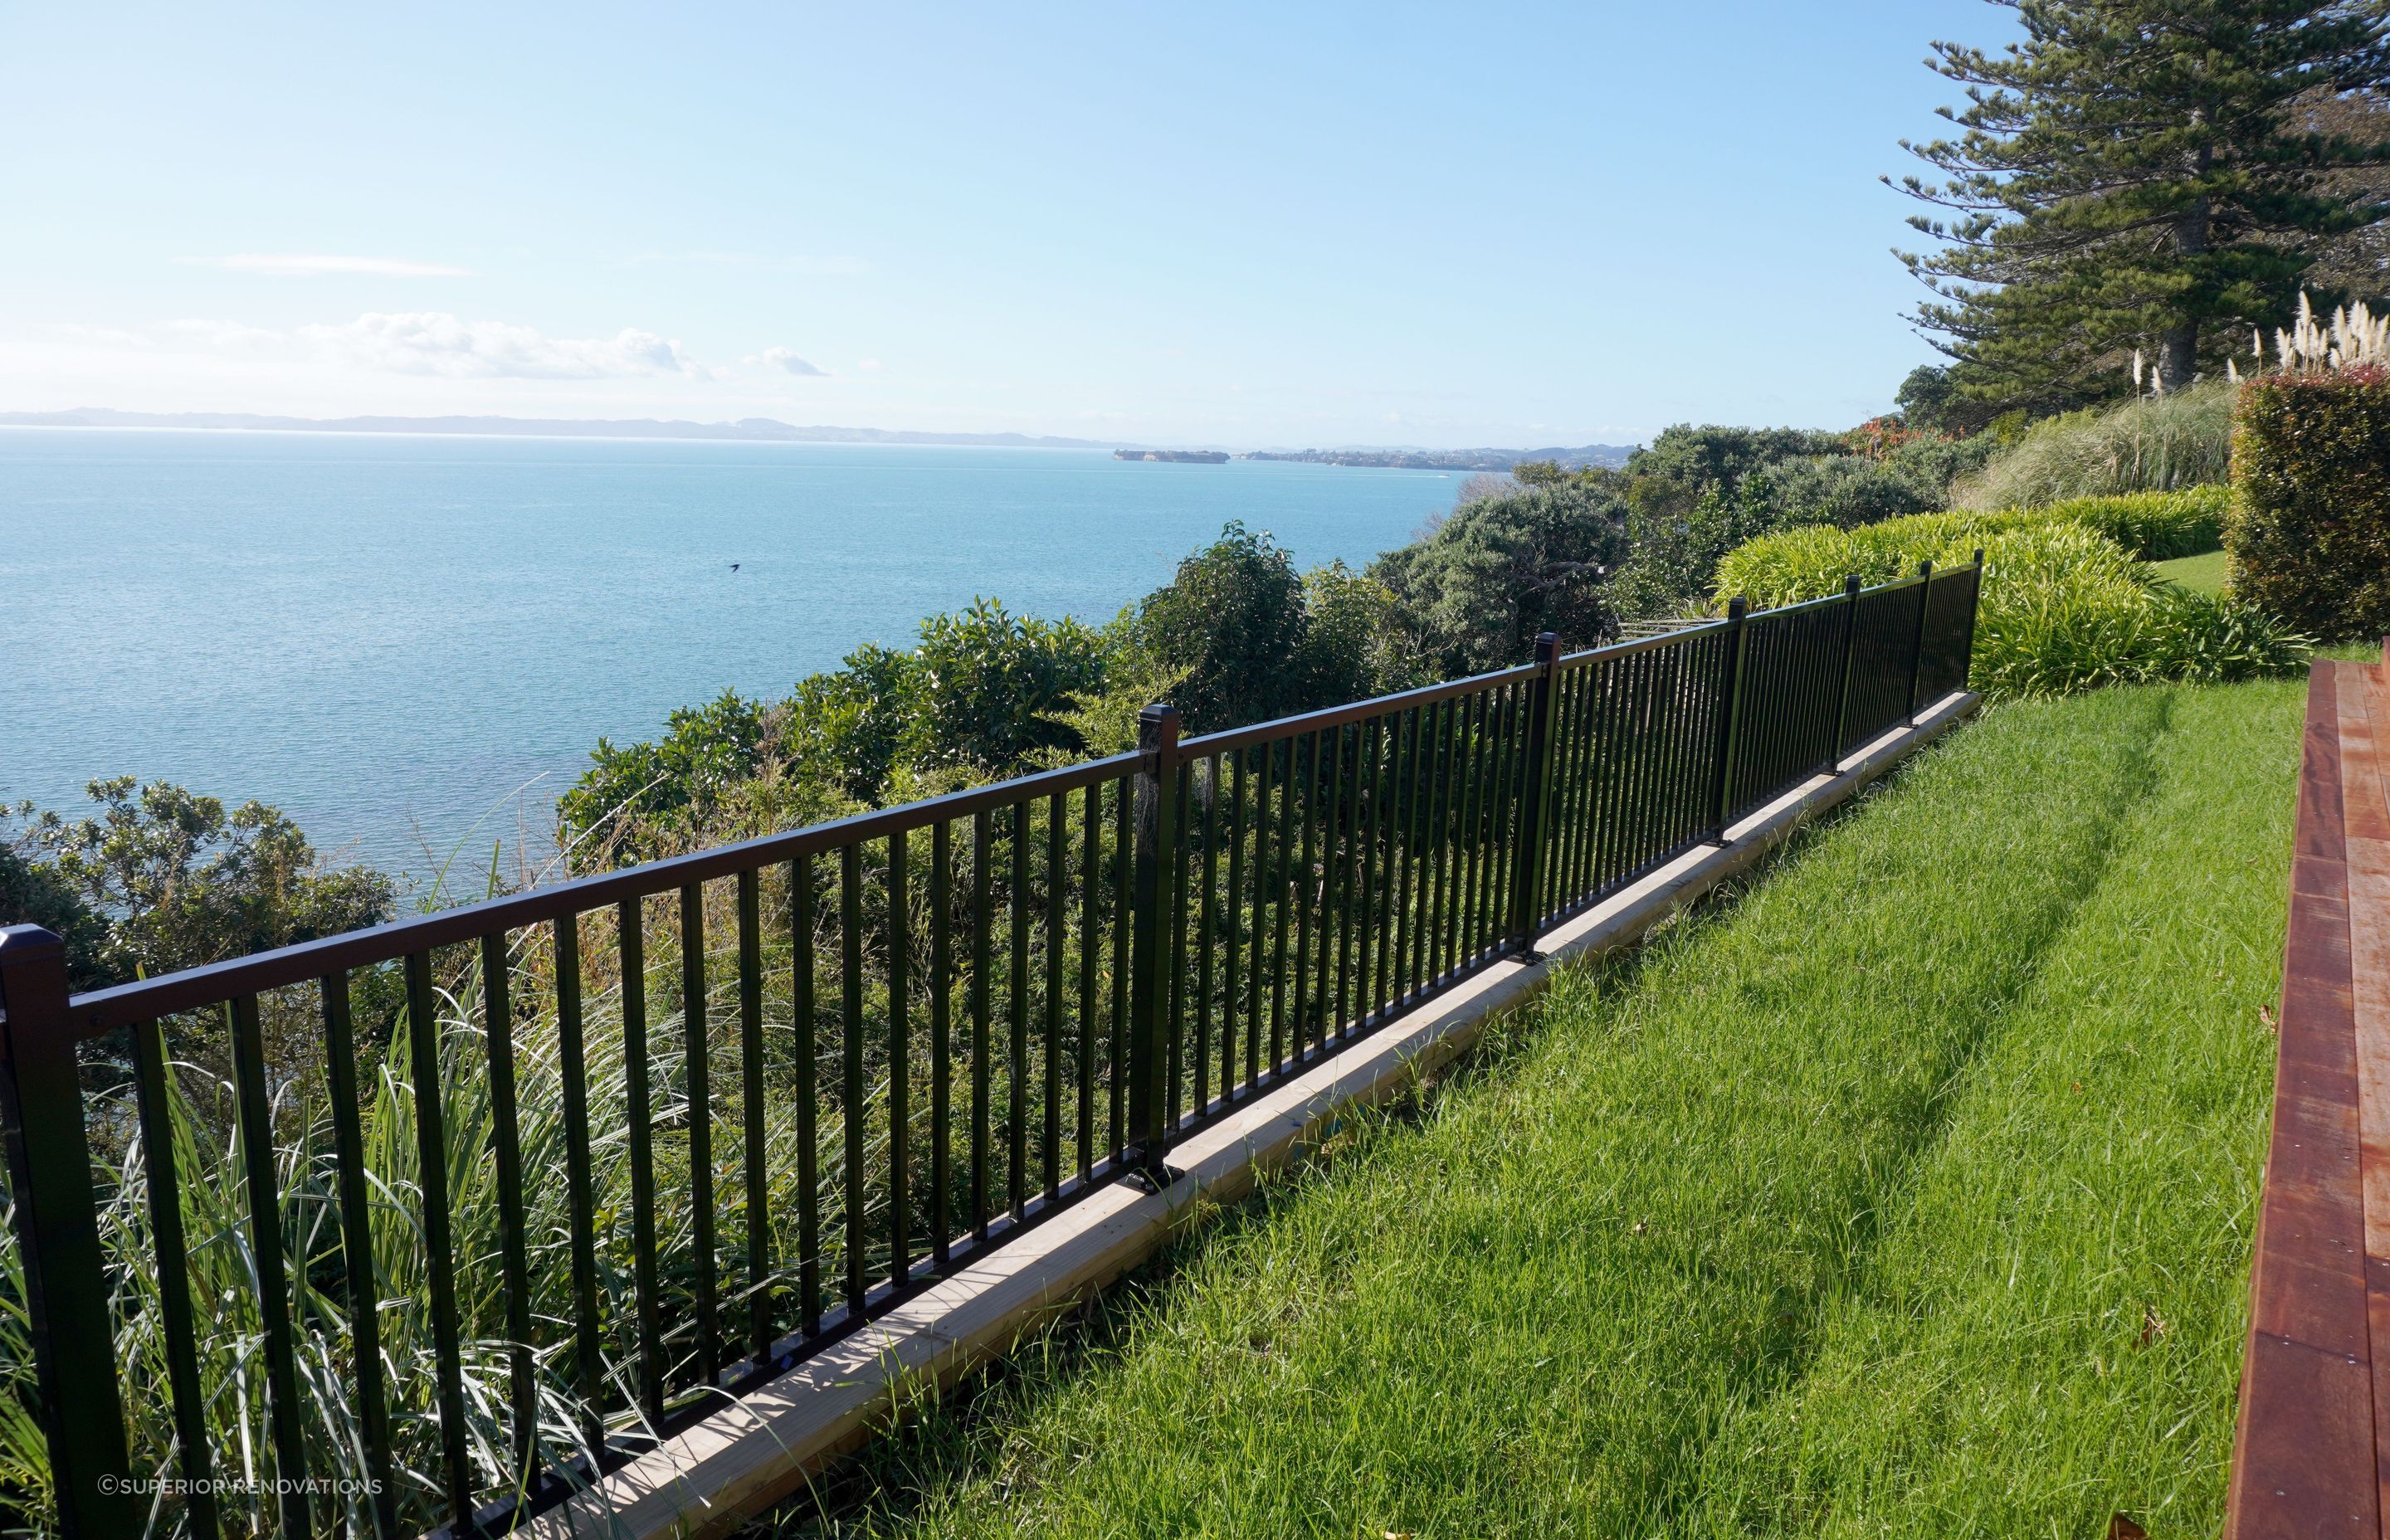 Alumininium Fencing in Mellons Bay which fences off the property from the cliff below.